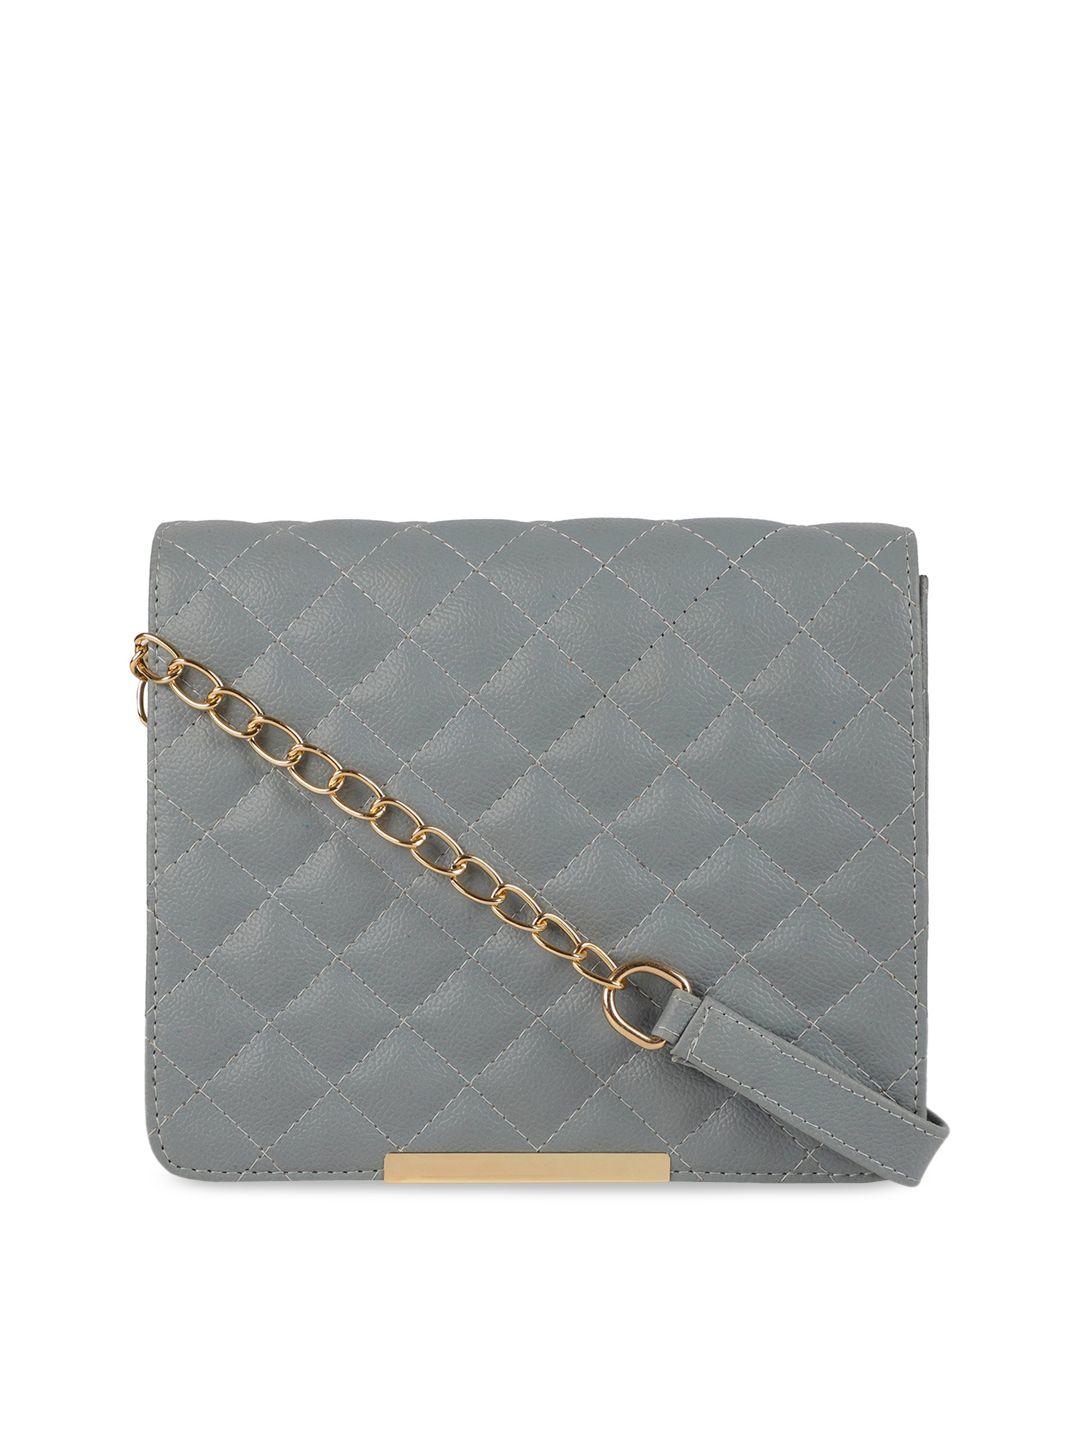 bagsy malone grey textured sling bag